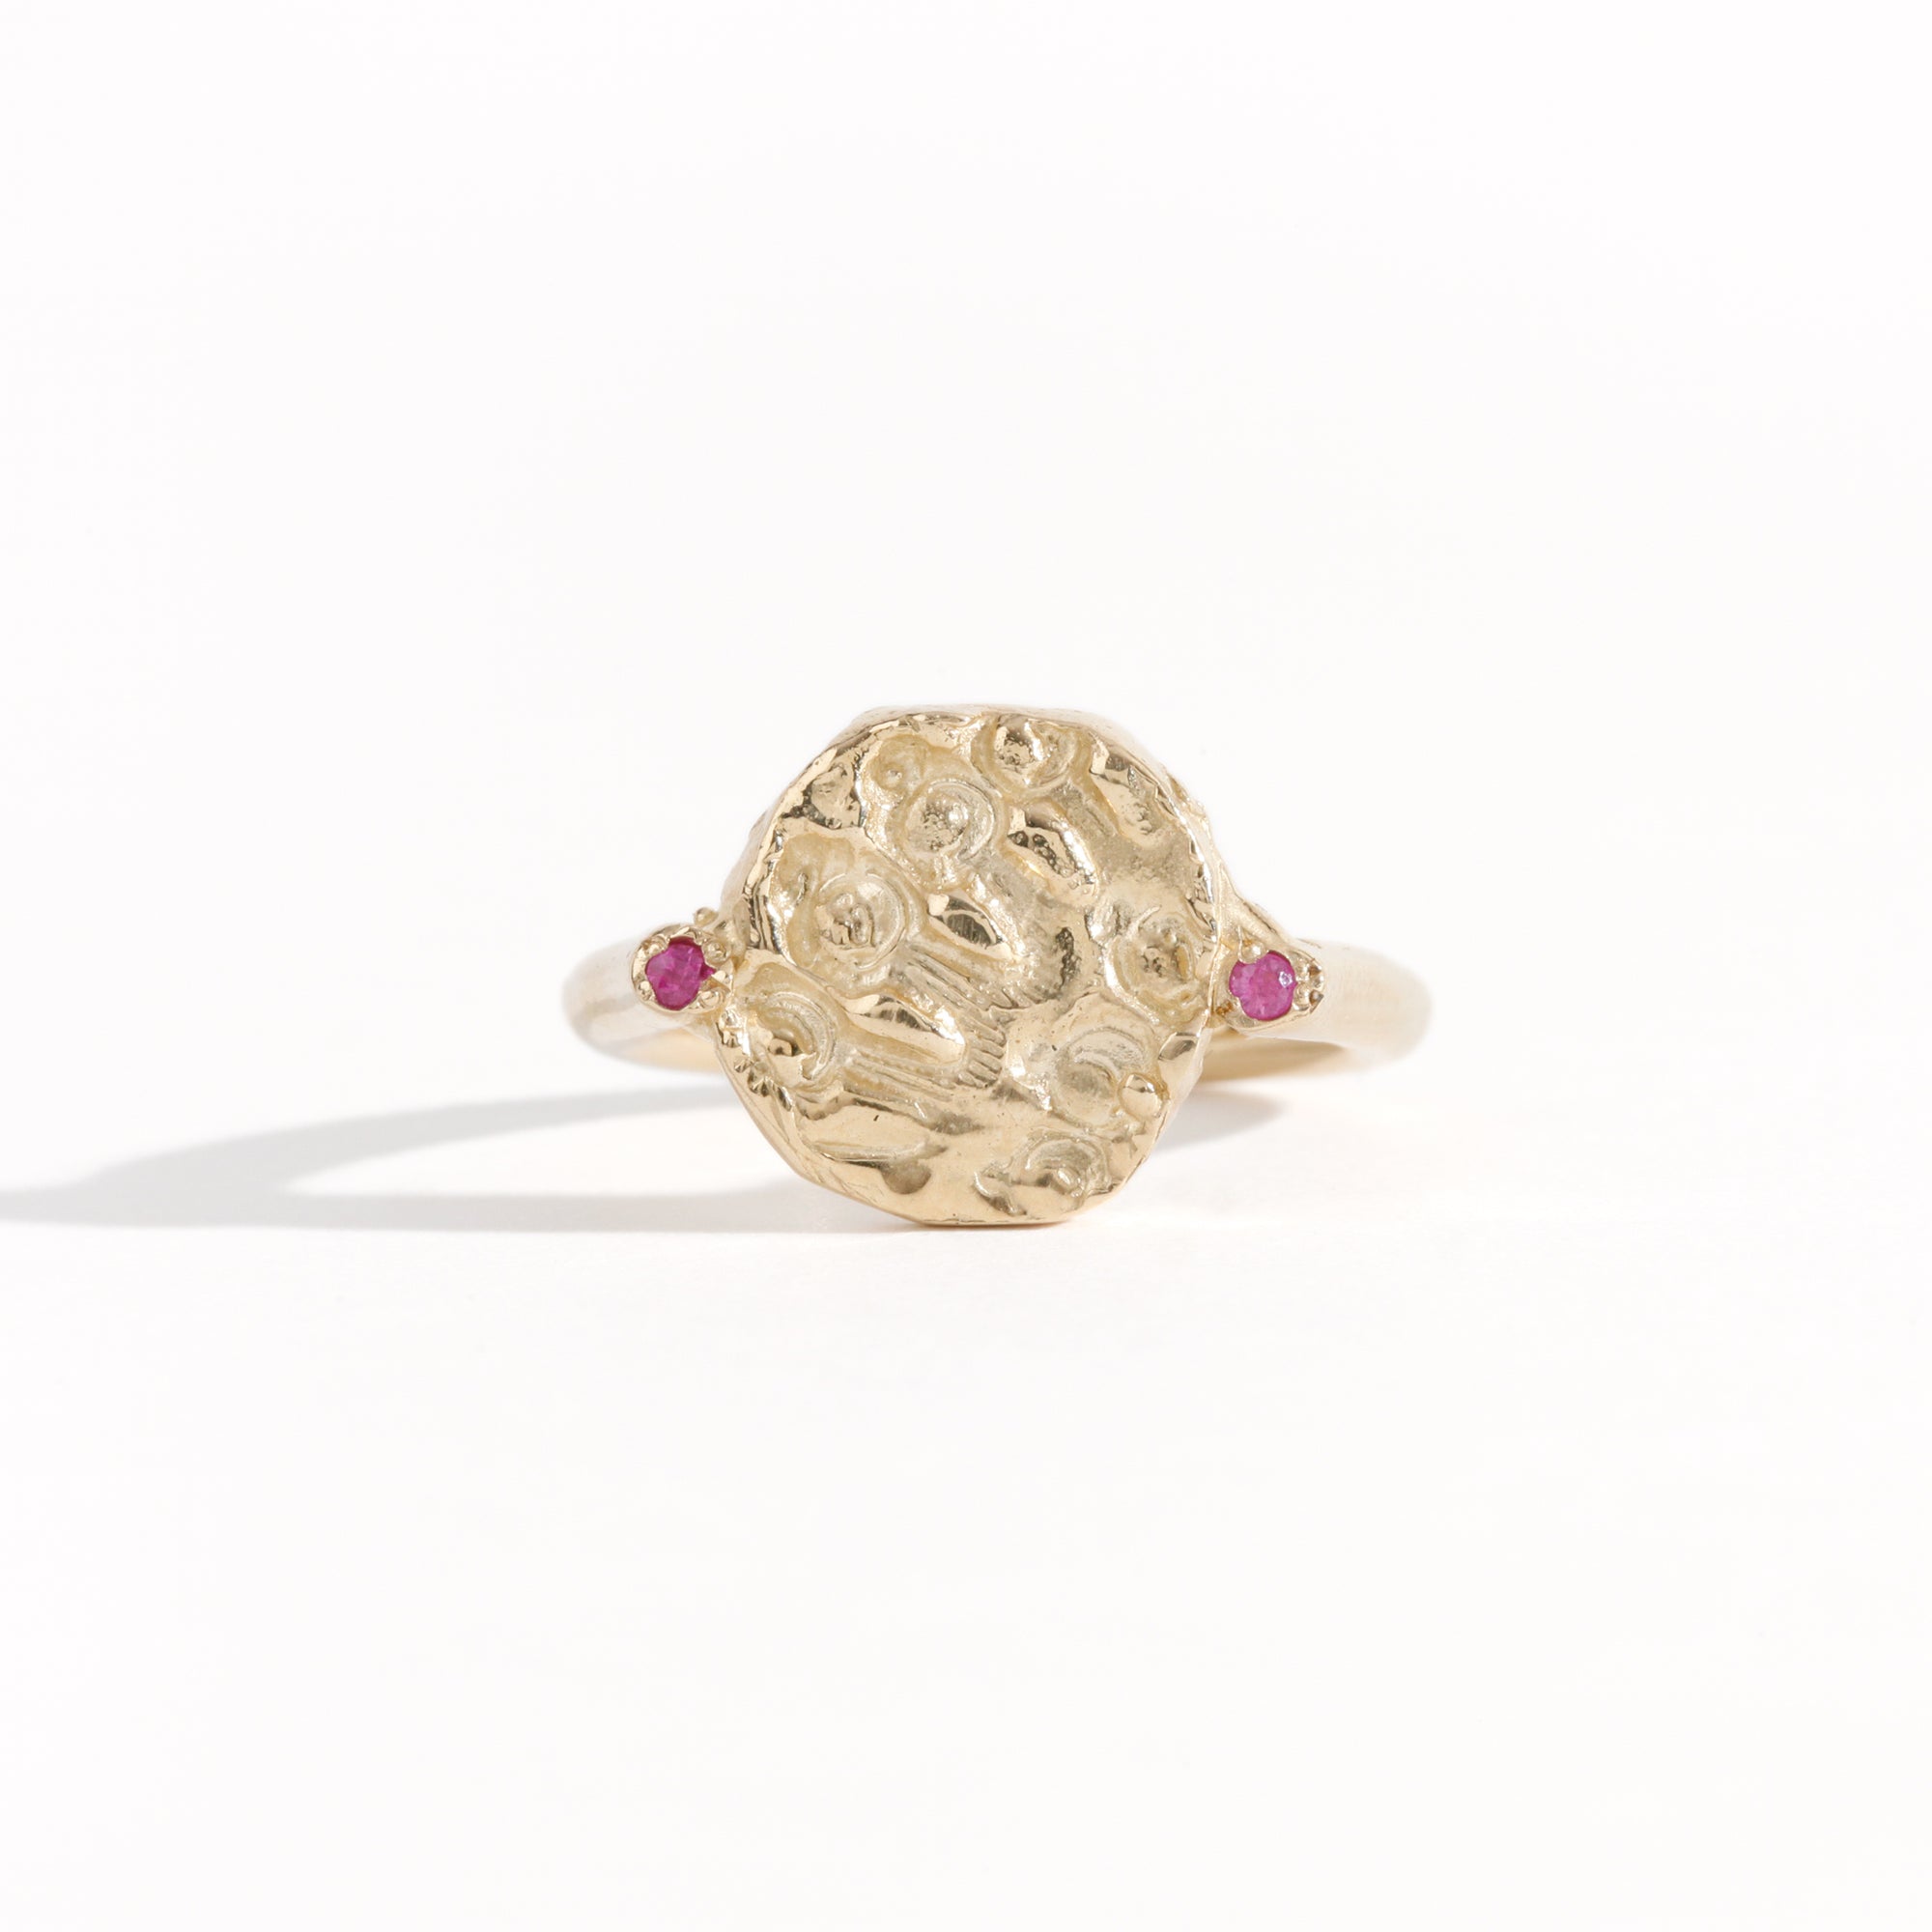 Handmade Signet Ring in 9ct Yellow Gold and Ethically Sourced Pink Ceylon Sapphires, Hand Made Jewellery, Made in Melbourne